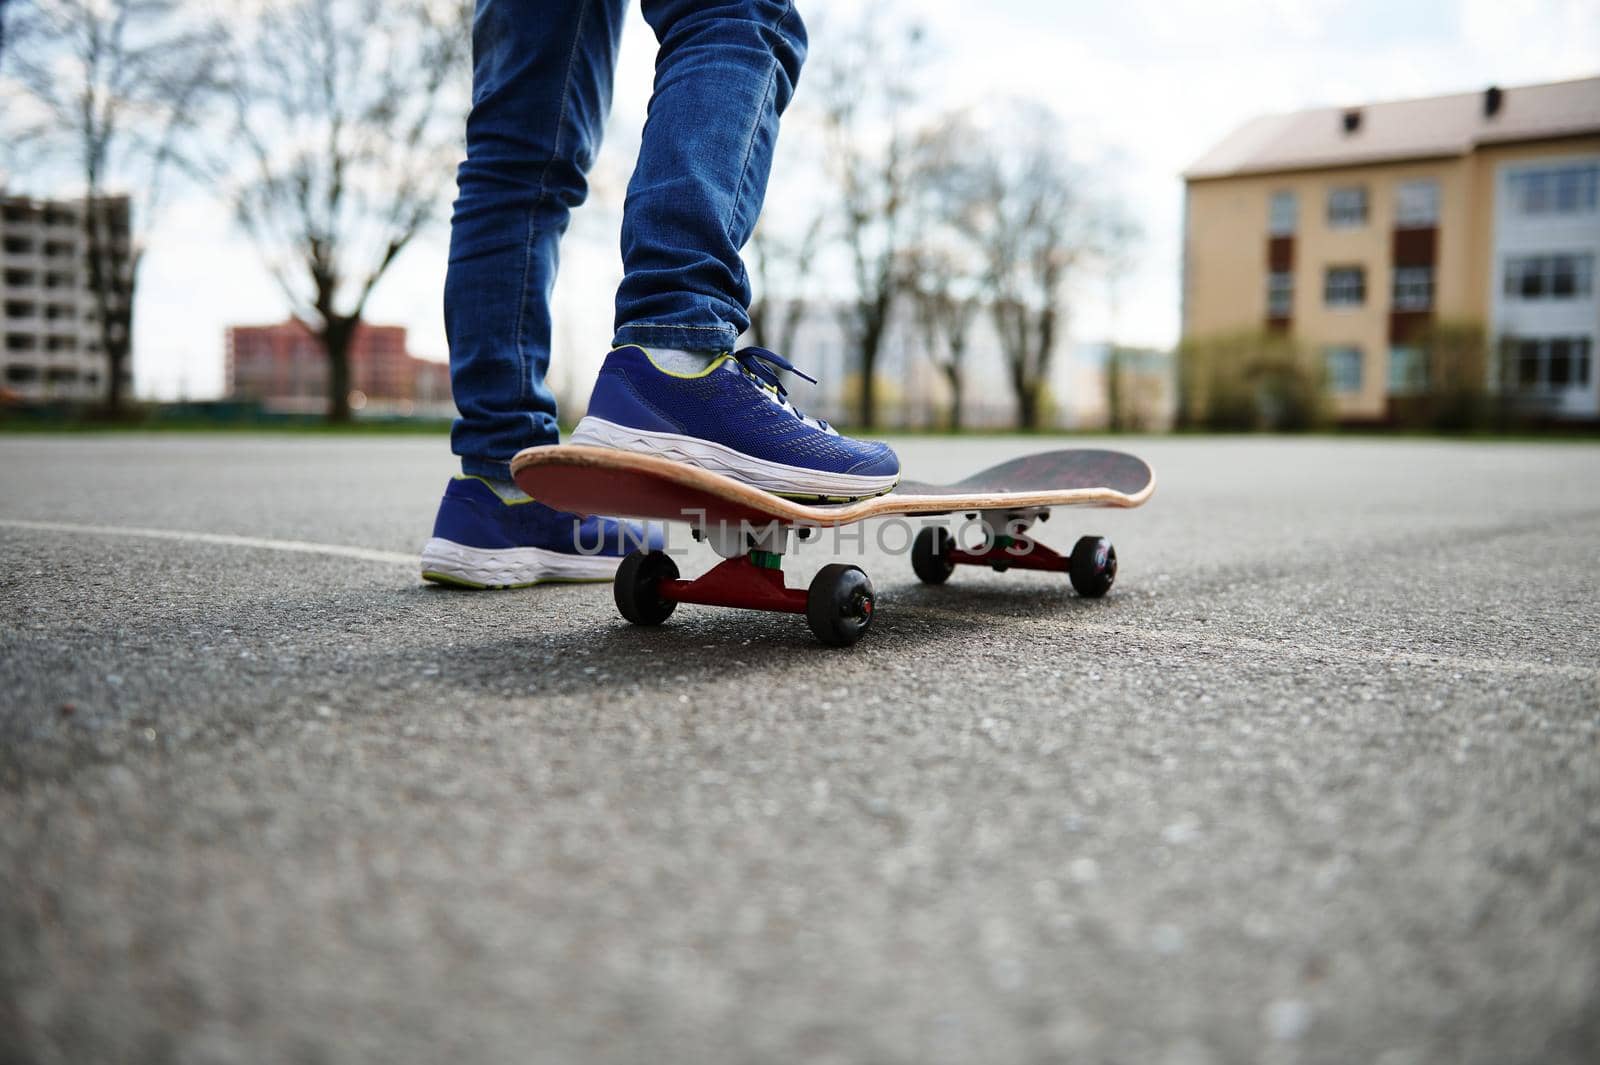 Closeup of skateboarder legs. Kid riding skateboard outdoor. Concept of leisure activity, sport, extreme, hobby and motion.